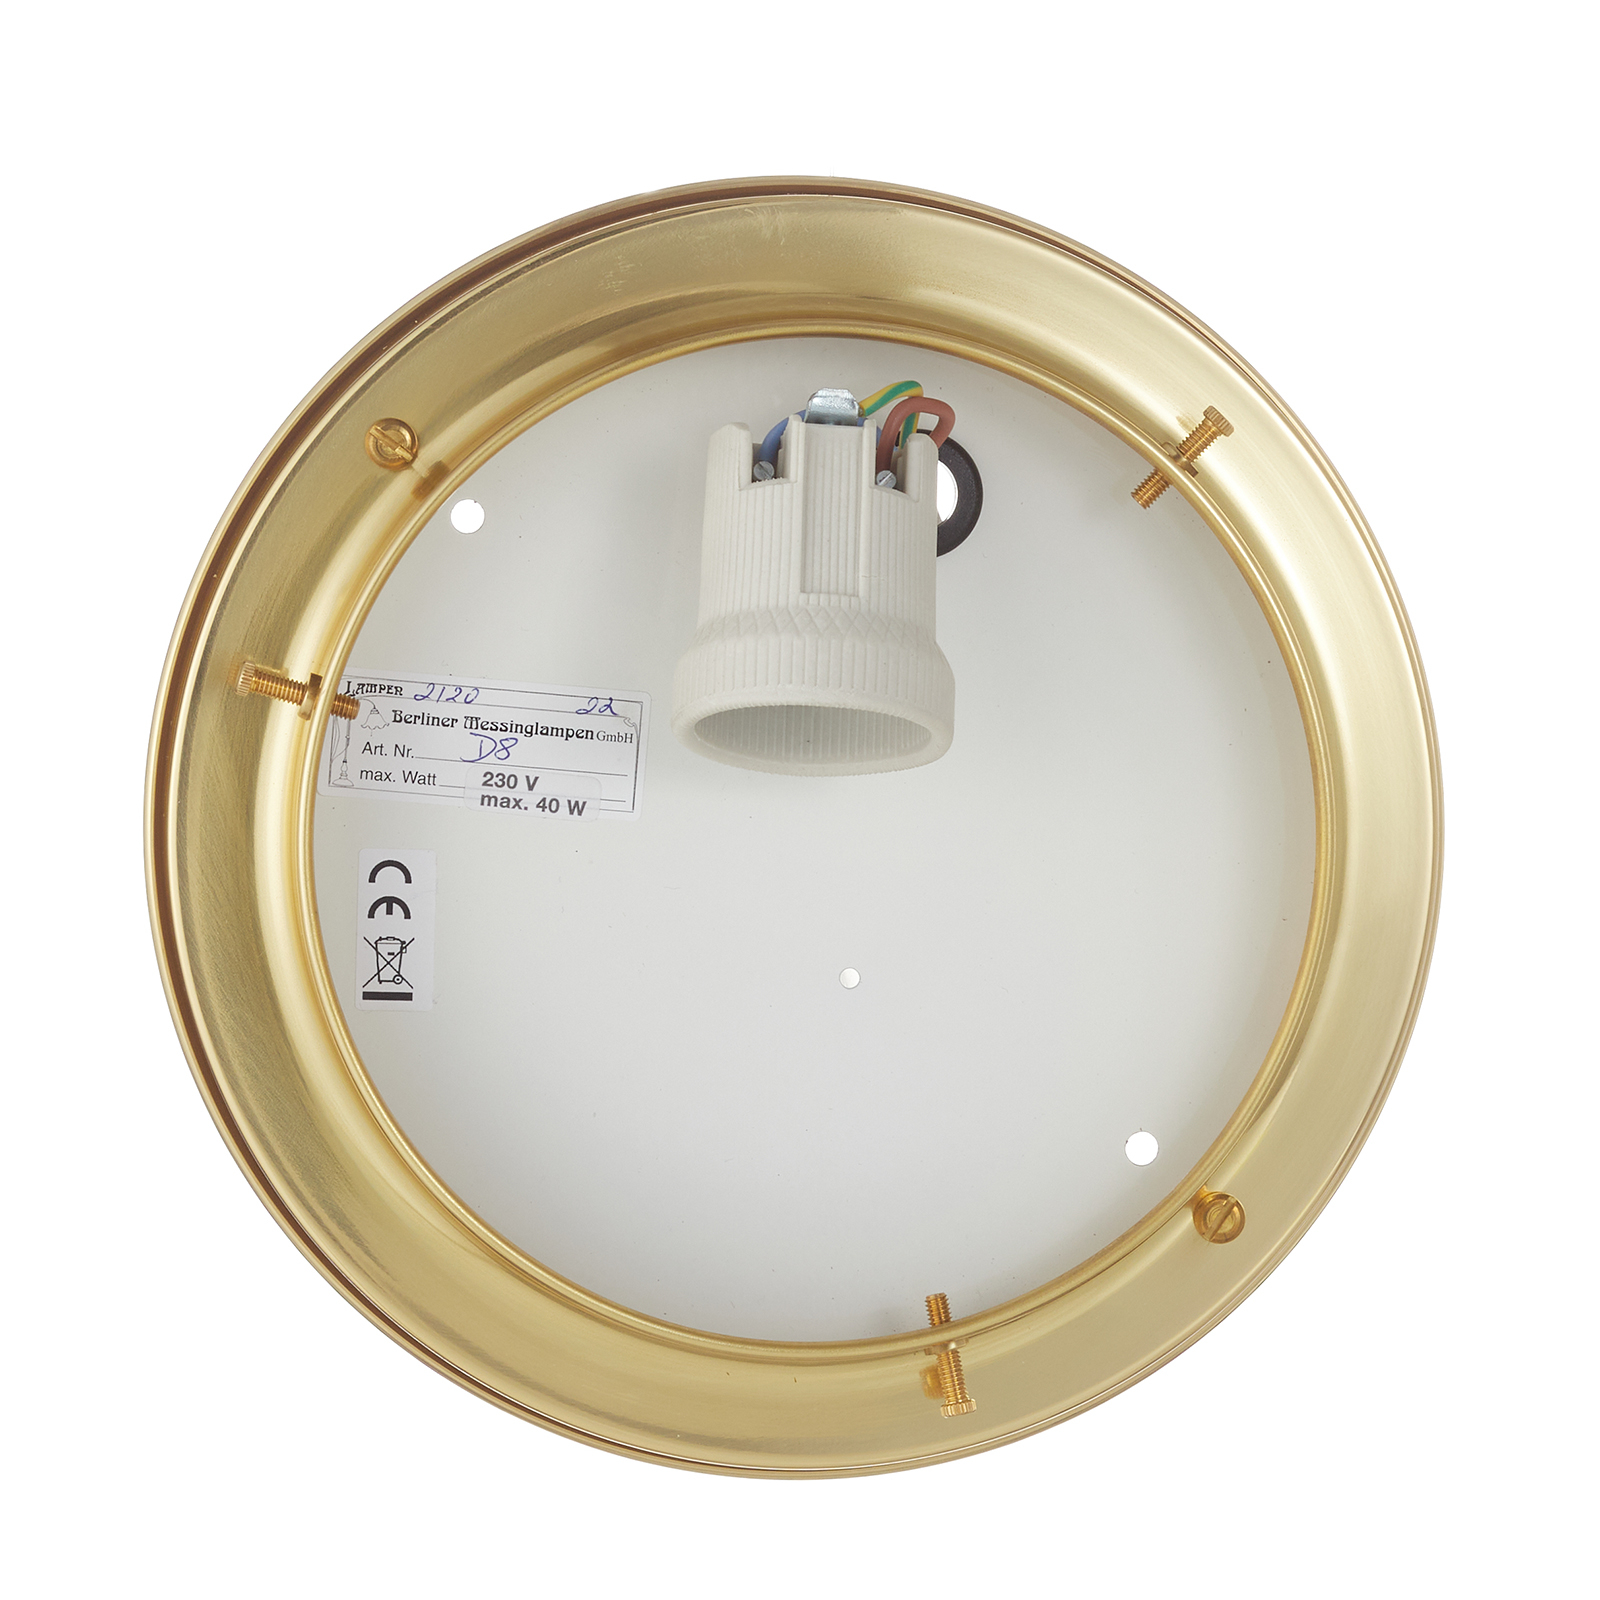 HARRY ceiling light with polished brass